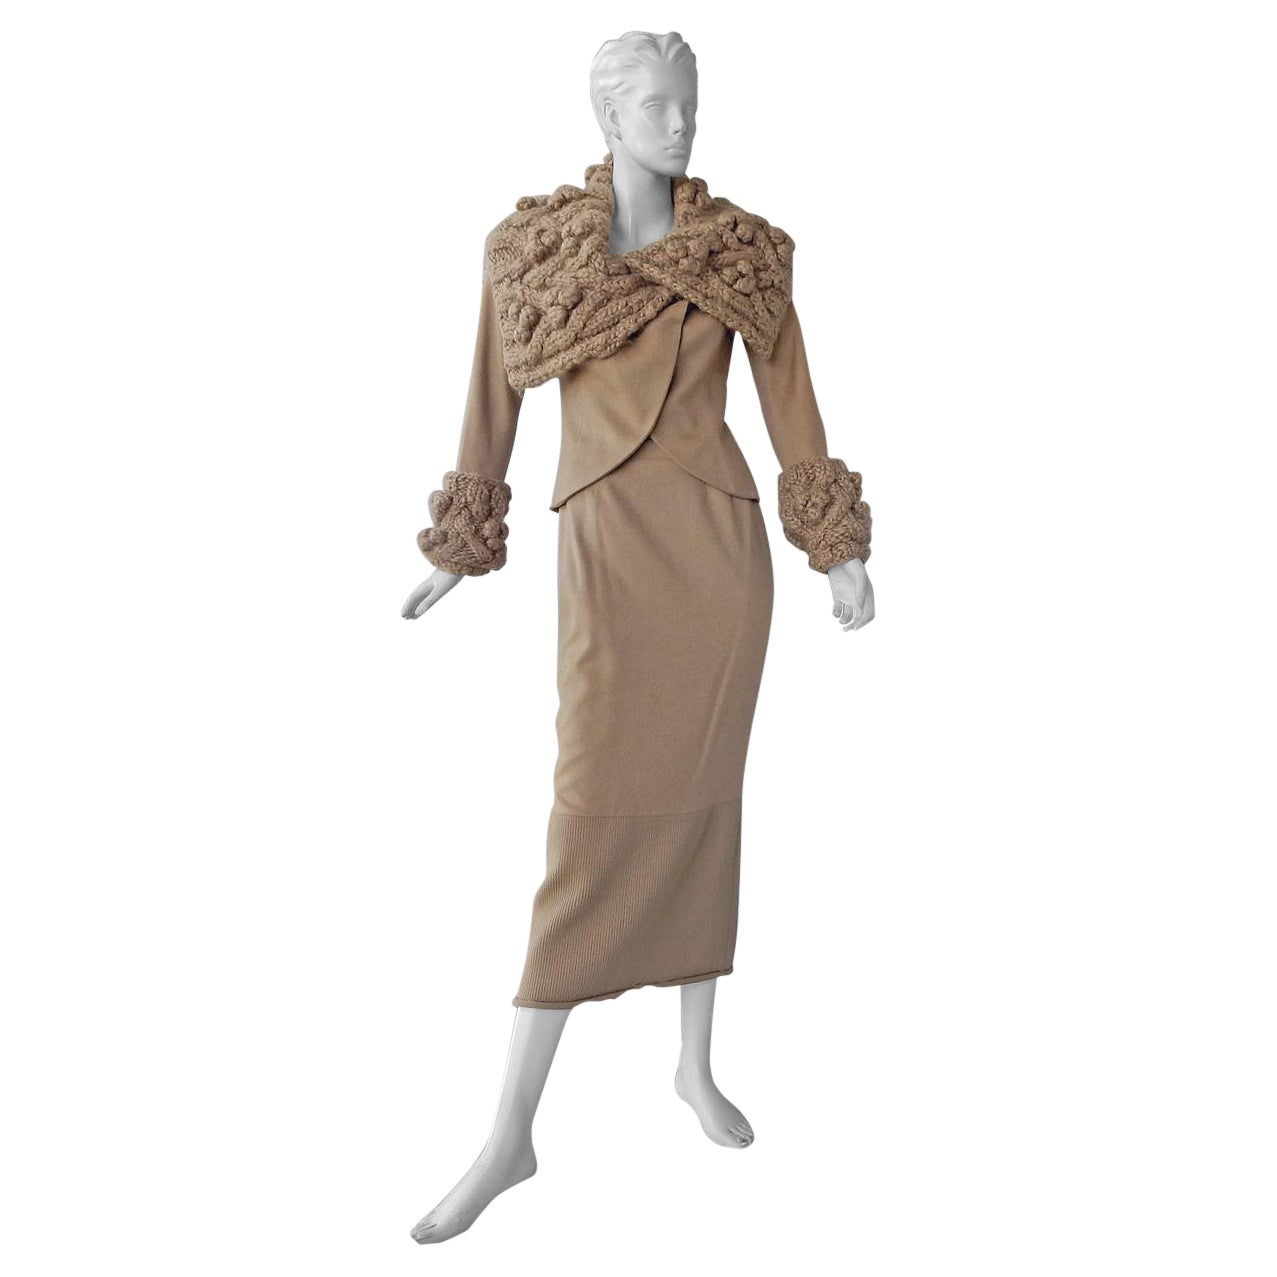 Christian Dior by John Galliano F/W 1999 Very Stylish Camel Cashmere Suit For Sale